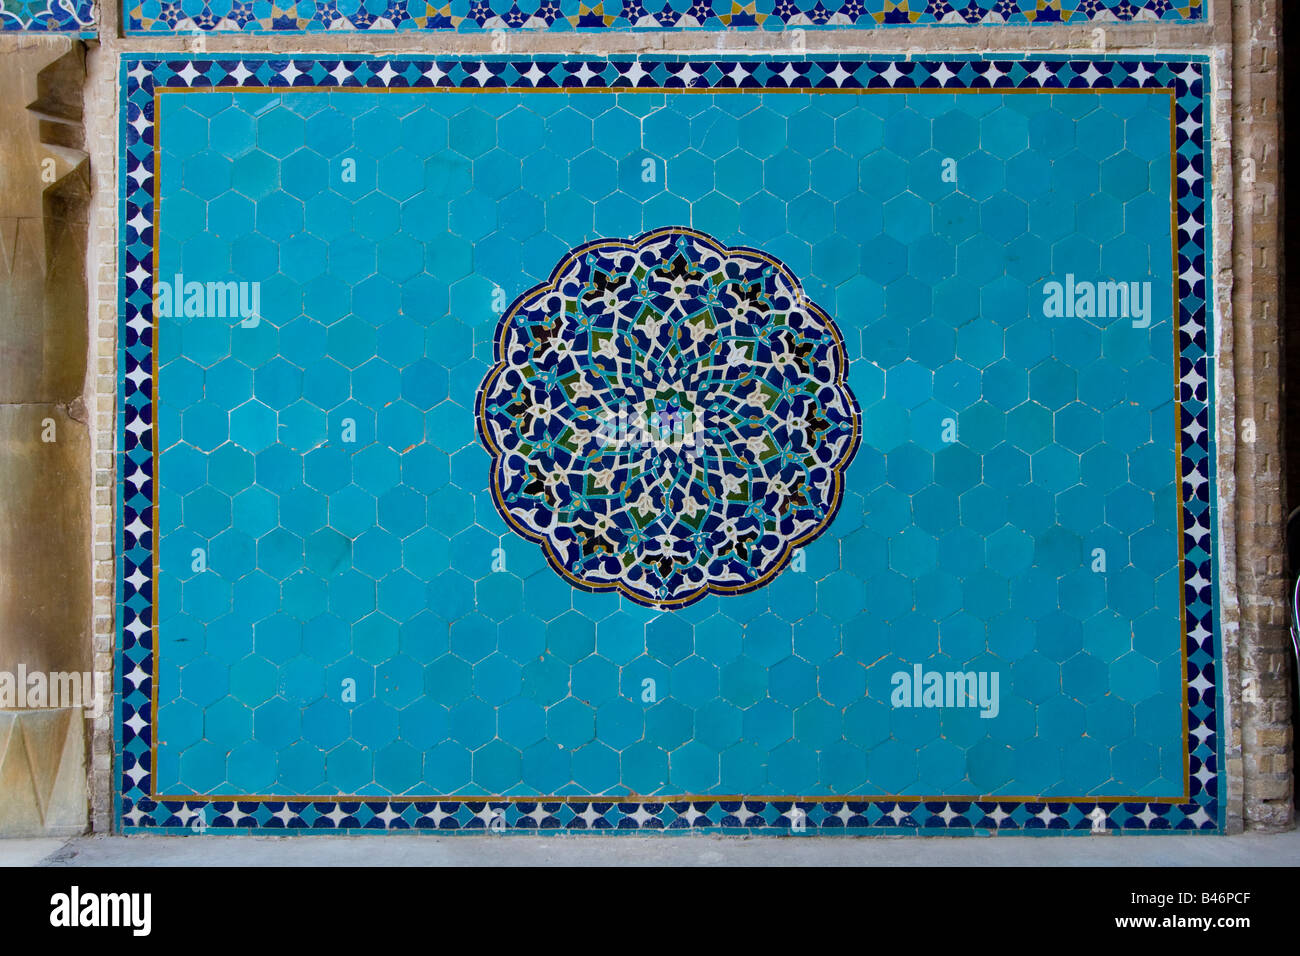 Decorative Tiles Inside Jameh Masjid or Friday Mosque in Yazd Iran Stock Photo